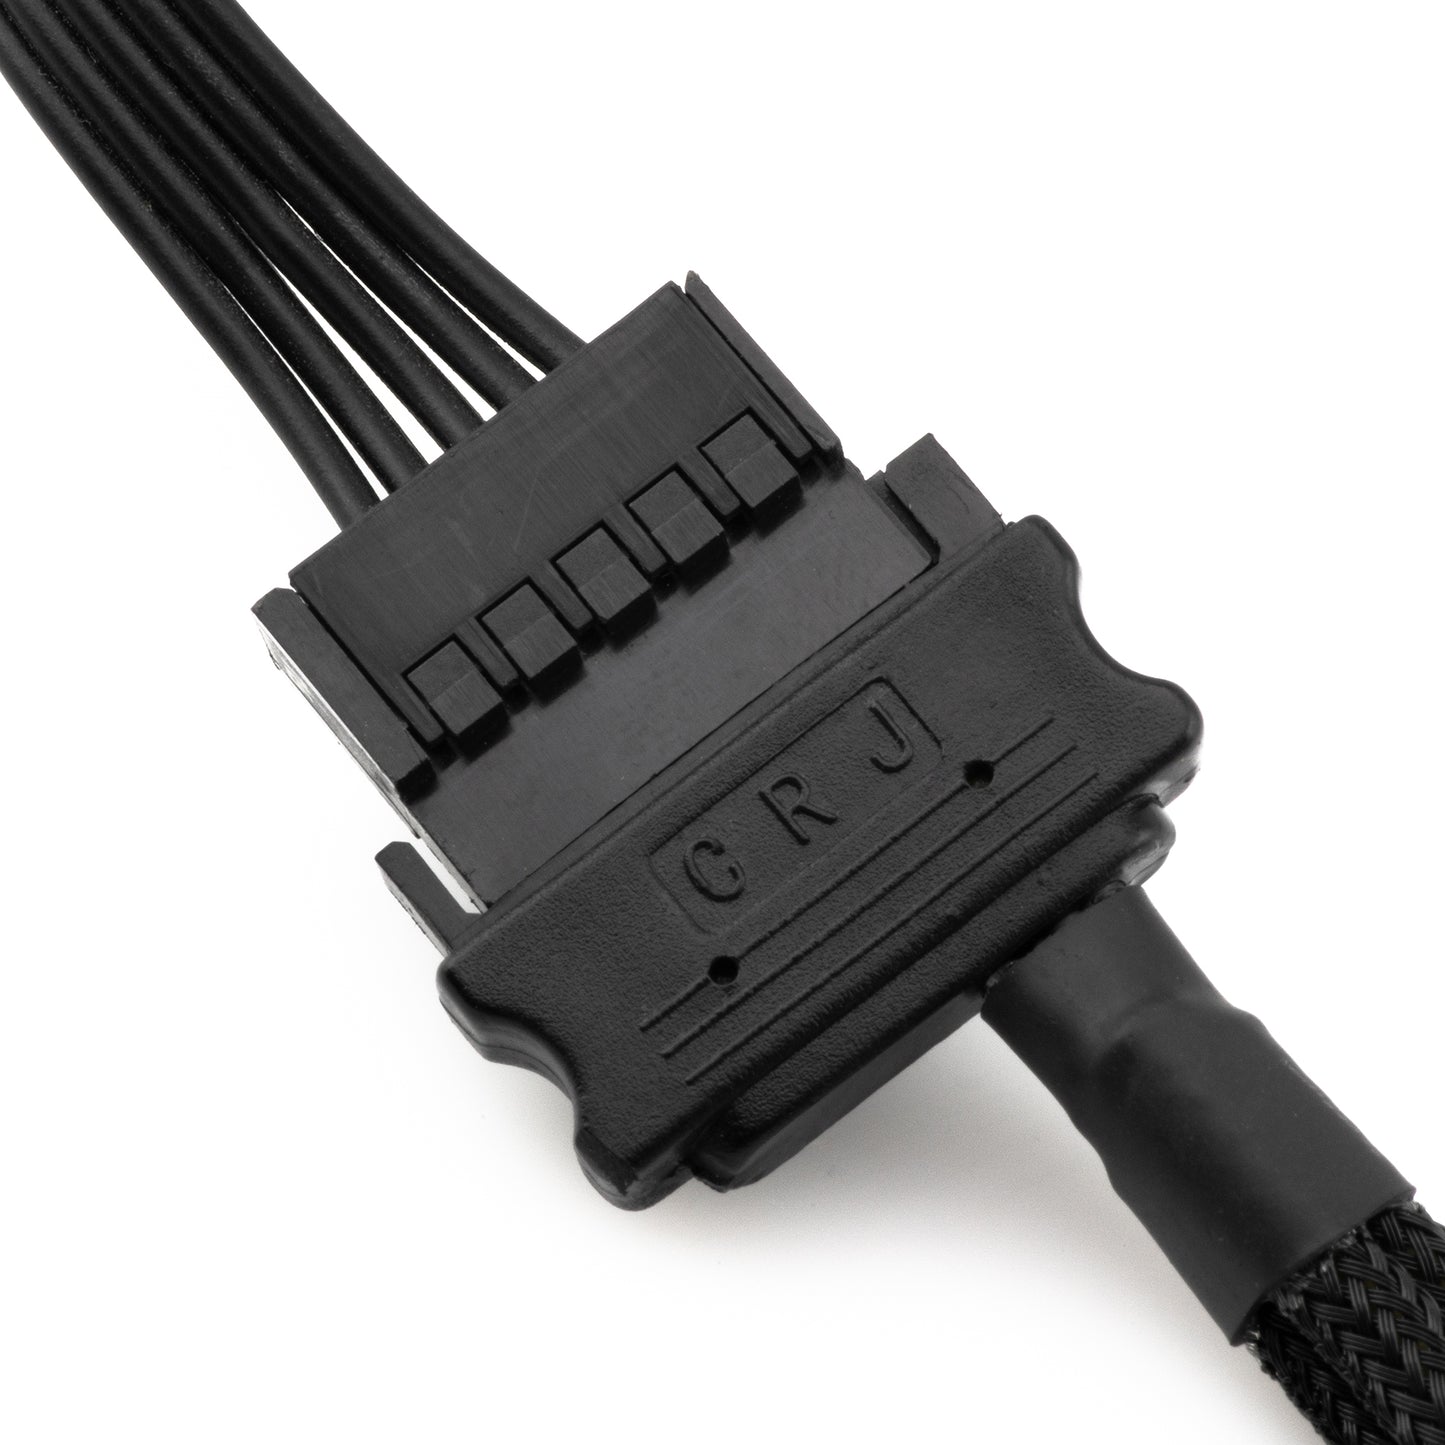 SATA to 3 Fan Sleeved 12V Power Adapter Cable